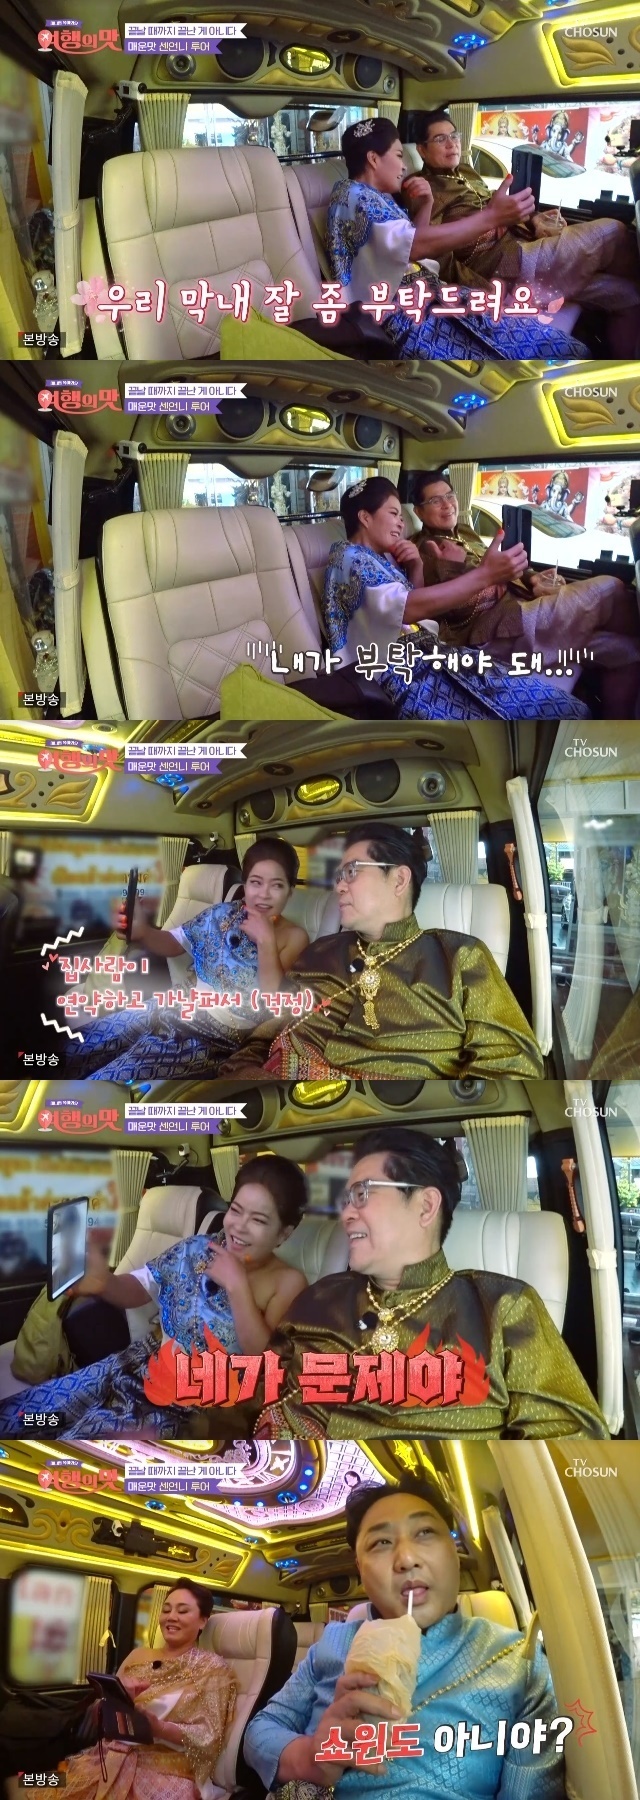 Jo Hye-ryun Husband showed affection for the bean pods.In the 5th episode of the TV Chosun entertainment show Taste of Travel, which aired on October 28, Jo Dong-ri (Jin Yong-man, Ji Suk-jin, Kim Soo-yong) and Sen sisters (Lee Kyung-sil, Park Mi-sun, Jo Hye-ryun) followed Bangkok, Thailand.On this day, Jo Hye-ryun made a video call to Husband without fail while driving.As soon as the phone was connected, they called each other baby and expressed affection, and Jin Yong, who was next to him, said to Husband over the phone, Yes, I will hang up if it is difficult.In response, Jo Hye-ryun told Husband, My brothers tell me not to bother them too much. It would be too much for me to say, Baby, and Husband replied, I like it. If I dont do it, I feel empty.Jin Yongman laughed at me, saying, Do not keep hypnotizing yourself.Jo Hye-ryuns Husband said that only Jin Yong is Jo Hye-ryuns travel mate, Brother, please take care of our youngest. Only Jin Yong said, I have to ask.Jin Yongman said, You are the problem. Kim Soo-yong said, Is not it a show window? He continued to laugh.Jo Hye-ryun, who entered the hostel afterwards, made a video call to Husband again and said, Baby, Im going to pack it now. I want to pack it. Do you want to see it or not?